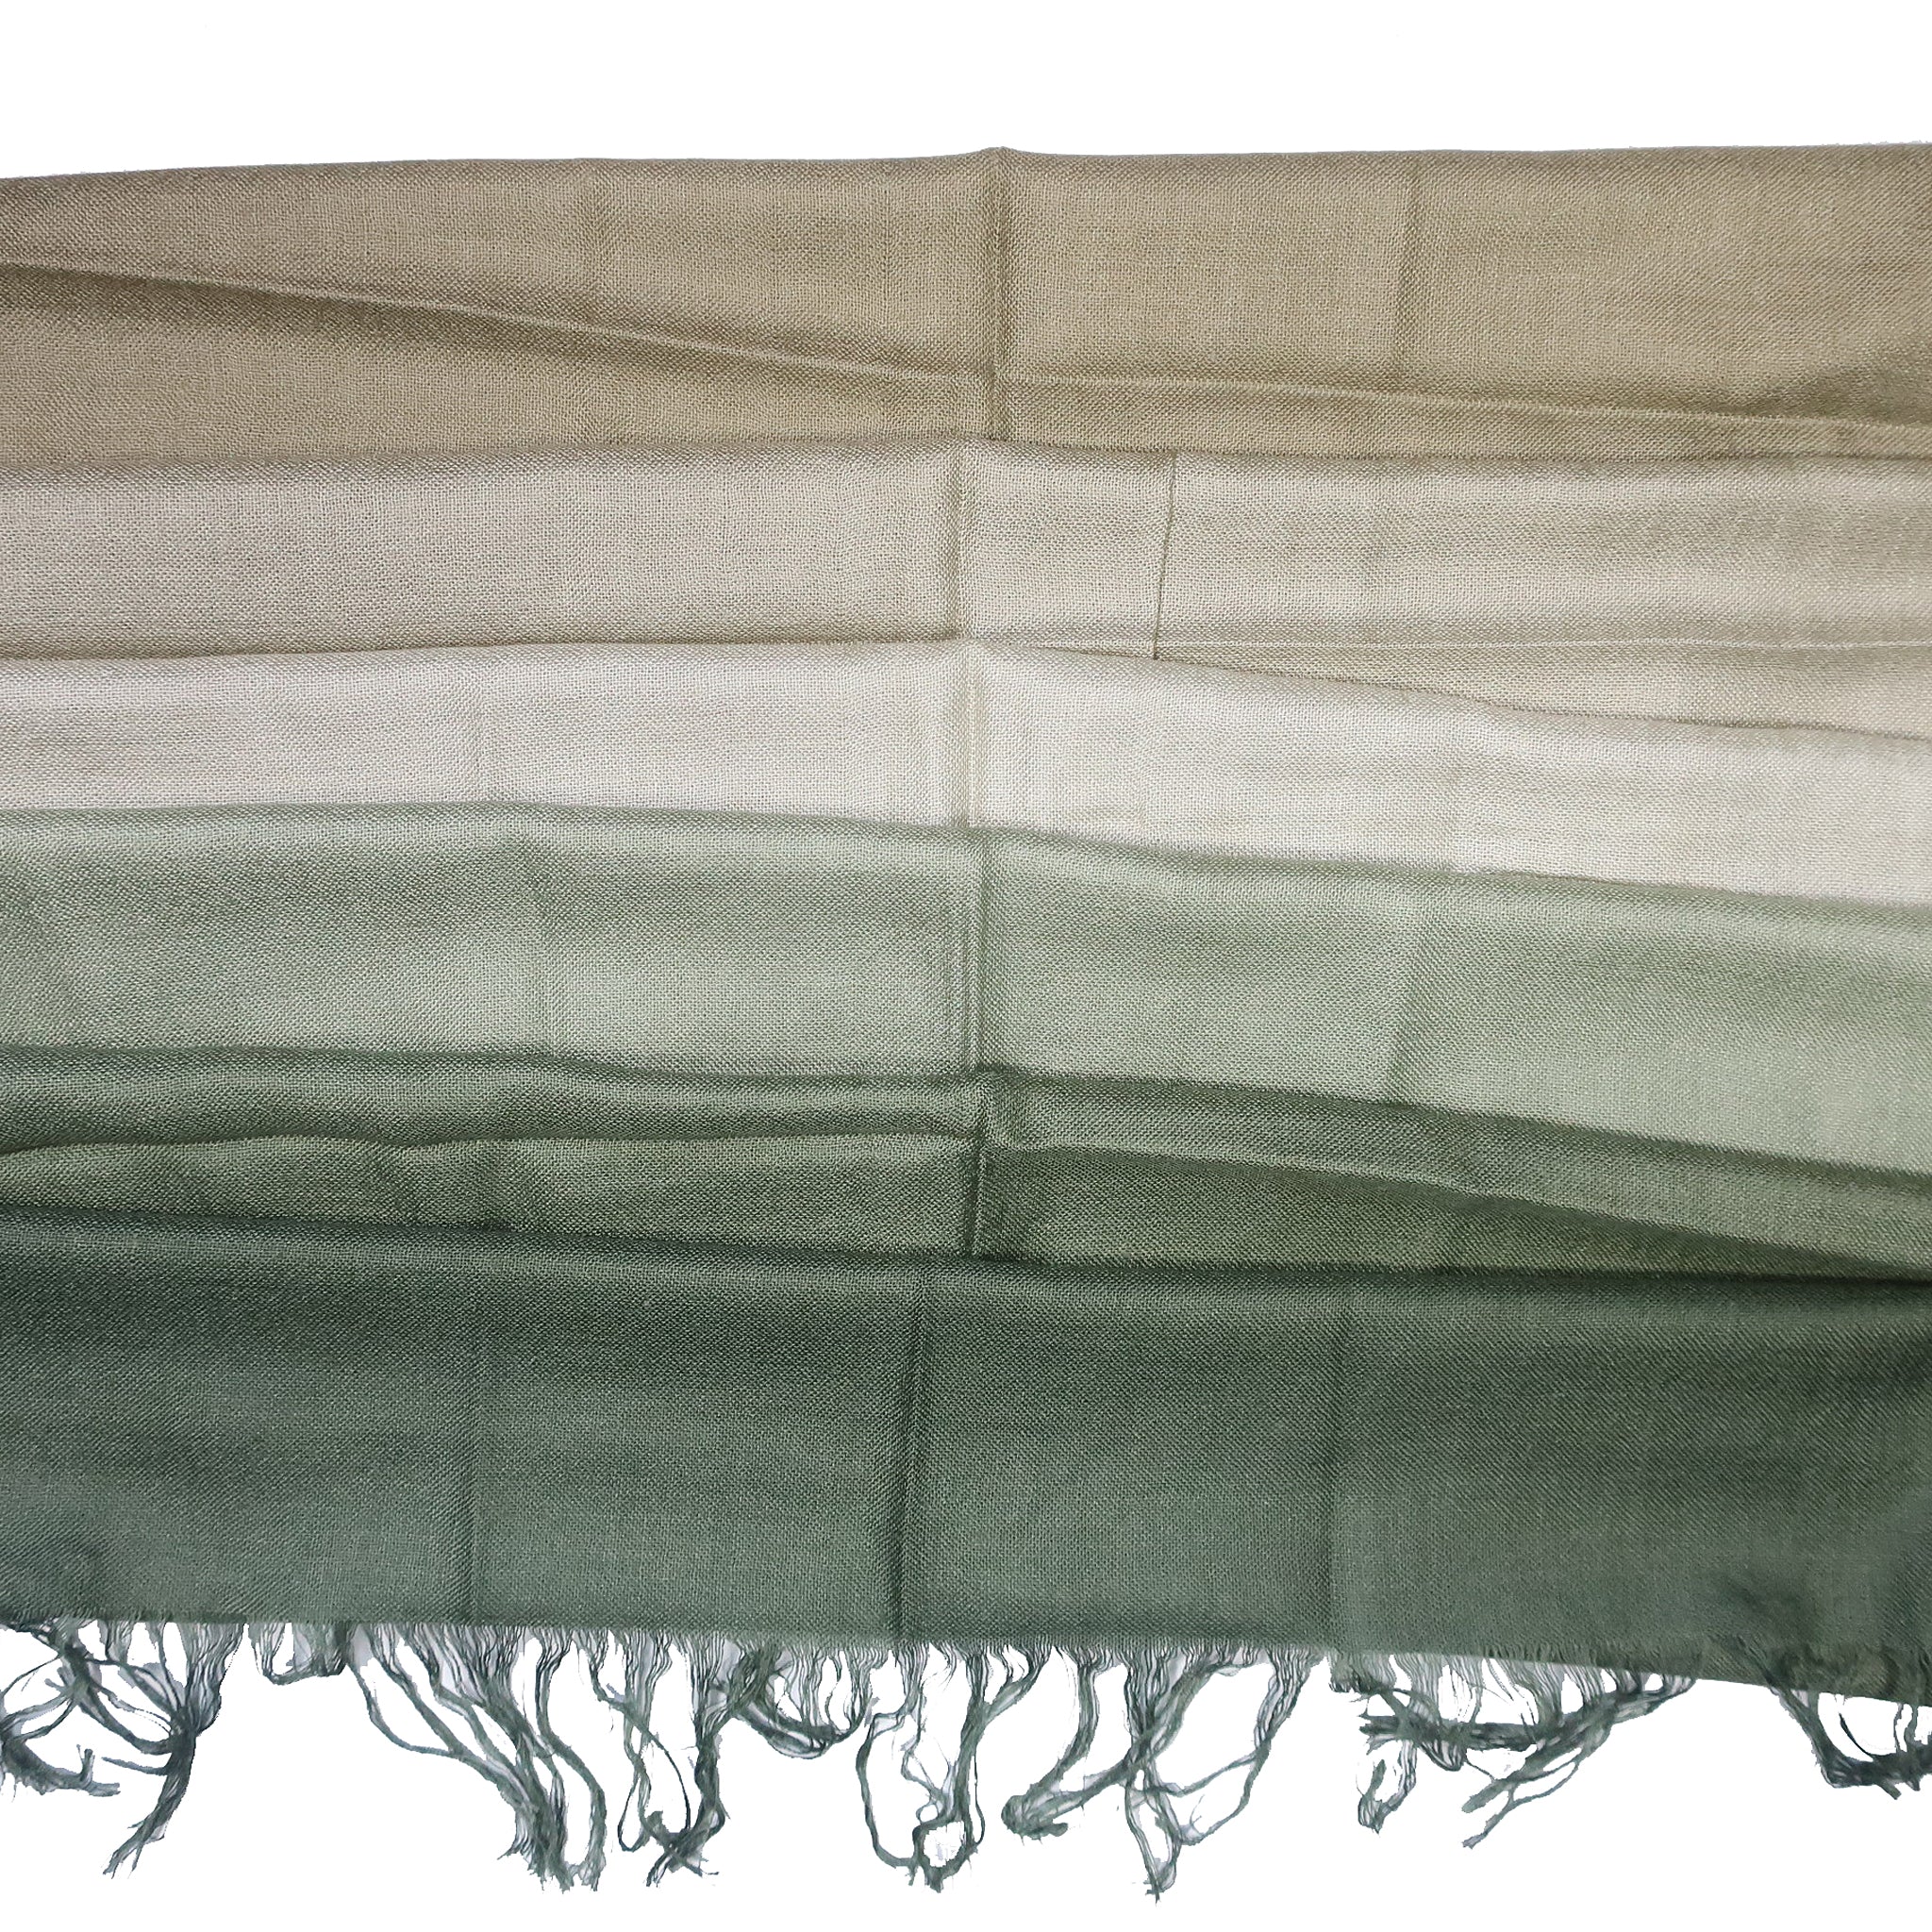 Blue Pacific Tissue Solid Micromodal Cashmere Scarf in Olive and Moss 28 x 60